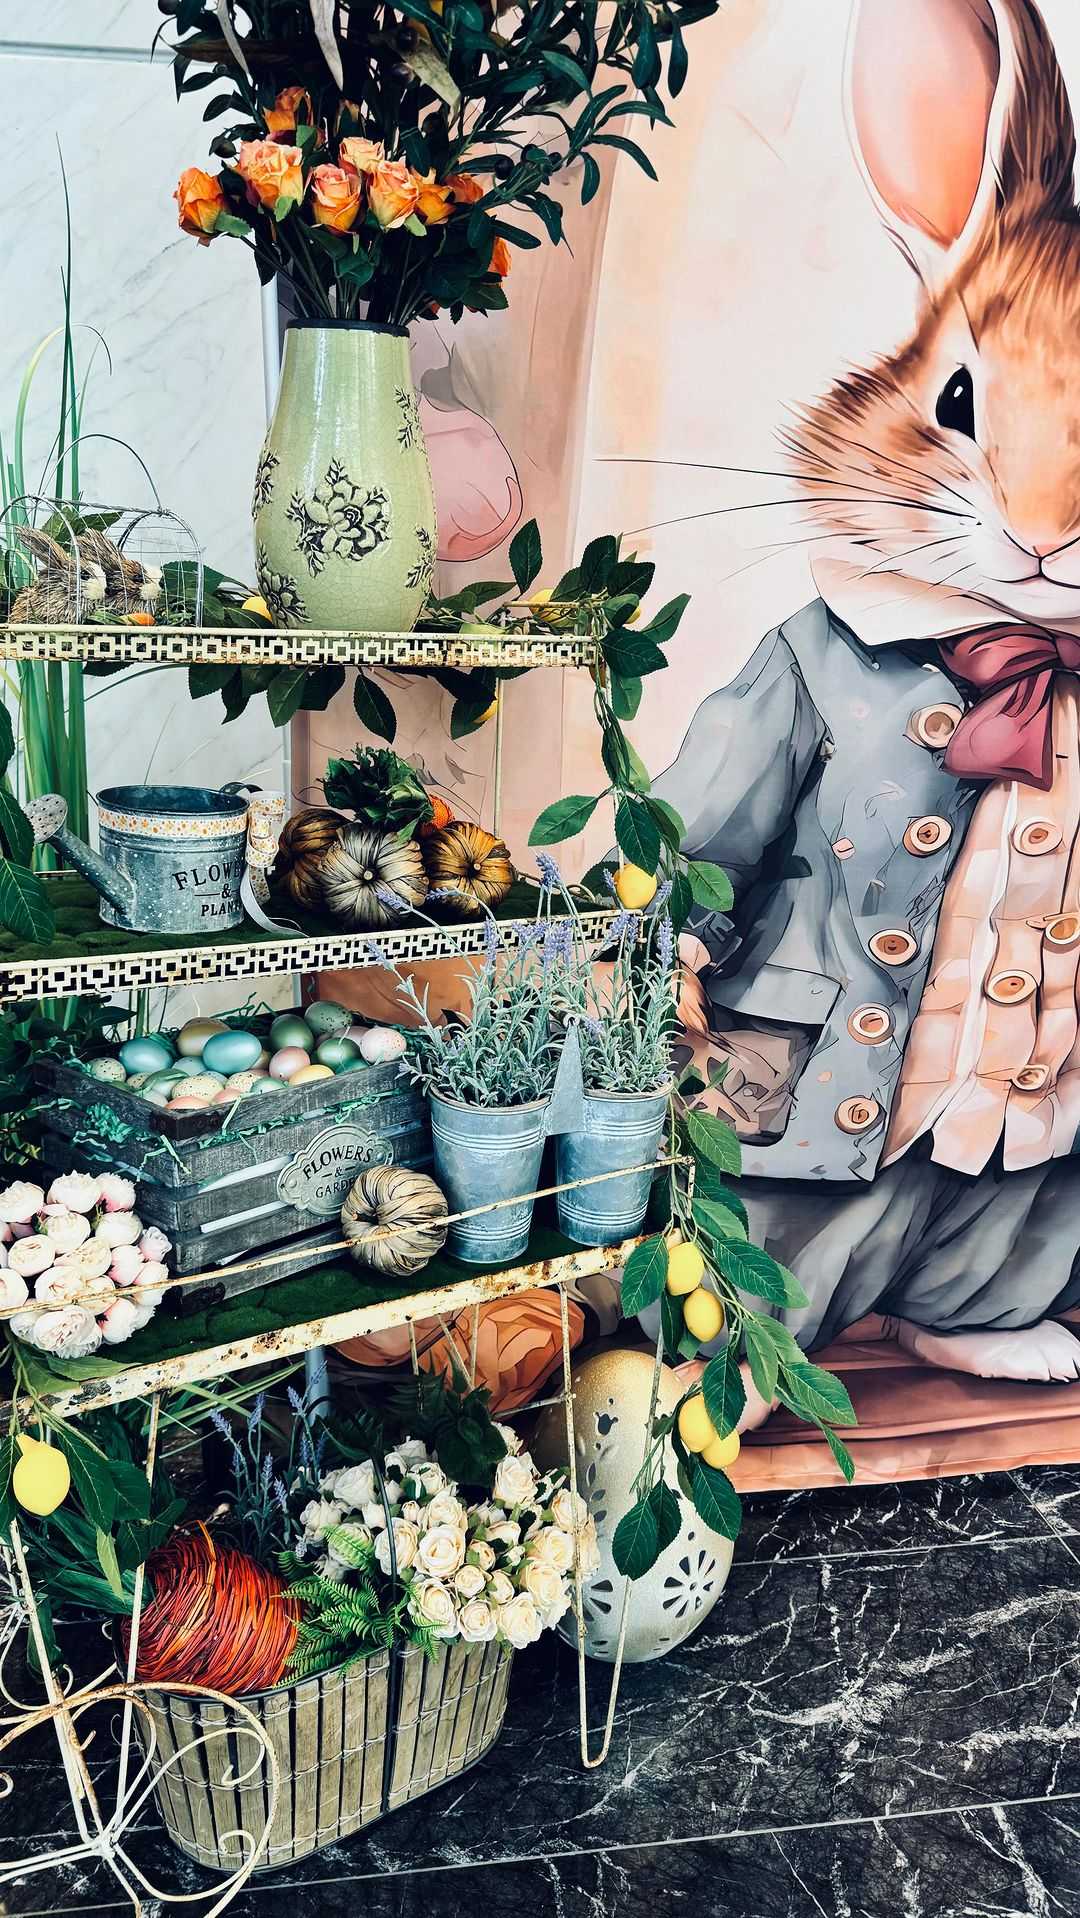 Head to McKinney & Olive to pose with Peter Rabbit from 12 p.m. to 2 p.m., and shop for your favorite peeps at our pop-up shop from 11 a.m. to 3 p.m. 

The following vendors will be in the lobby featuring an array of Easter gifts. Don’t miss out! 
@officialkwchocolate 
@kesslerbakingstudio 
@yopoppopcornandgiftbaskets 

#mckinneyandolive @uptowndallas #uptowndallas